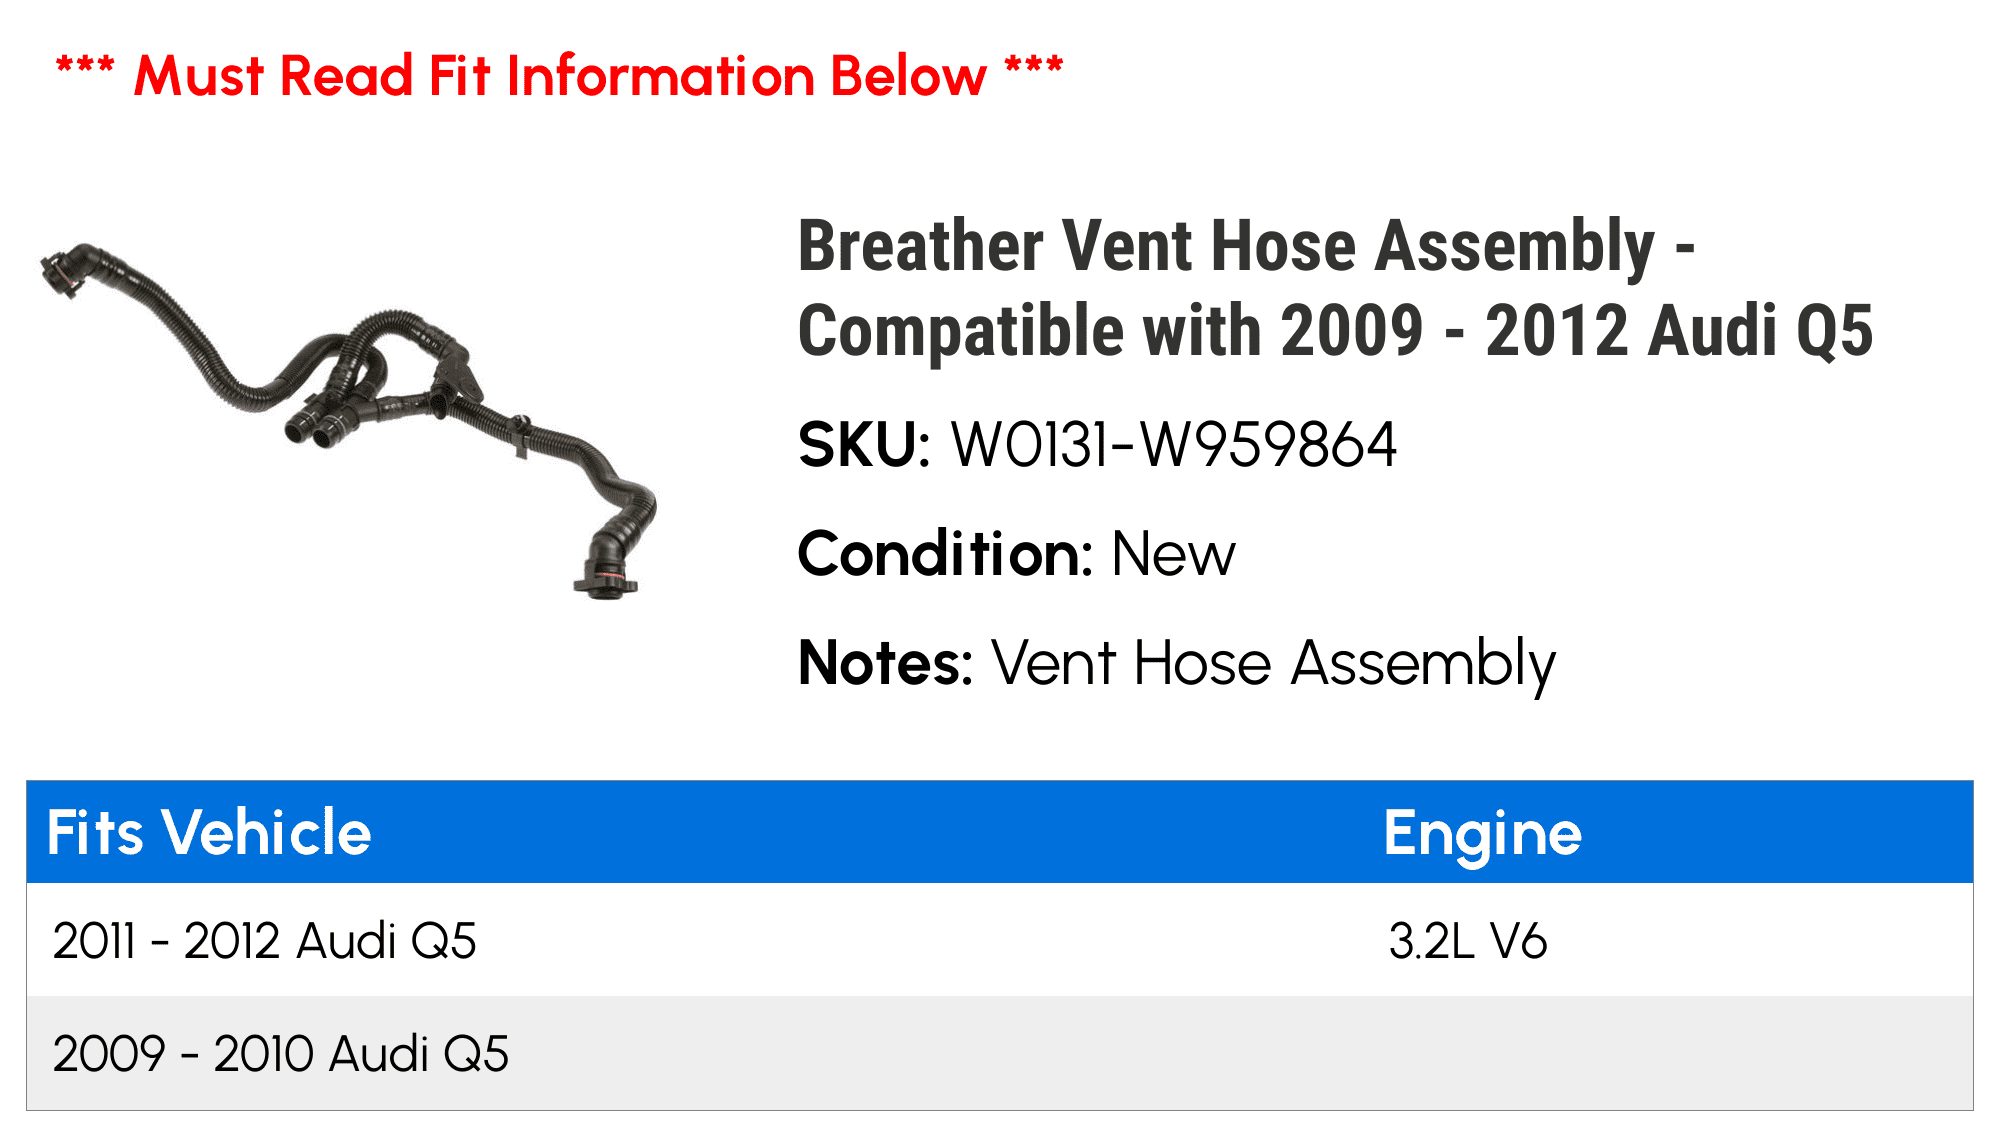 Breather Vent Hose Assembly Compatible with 2009-2012 Audi Q5 